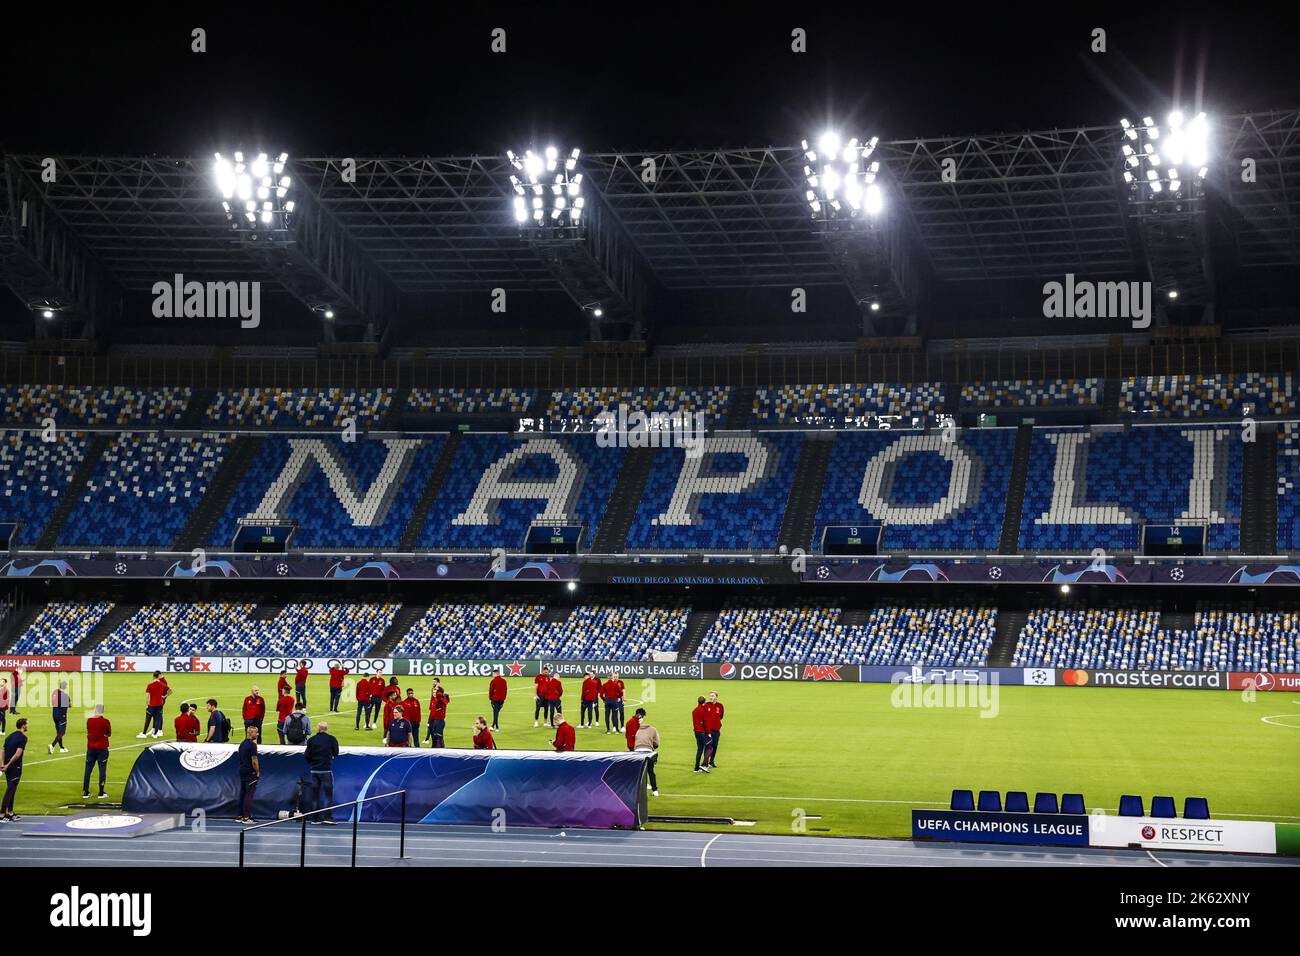 NAPLES - Ajax players during the Walkaround the pitch ahead of the Champions League match against SSC Napoli at Stadium Diego Armando Maradona on October 11, 2022 in Naples, Italy. ANP MAURICE VAN STEEN Stock Photo